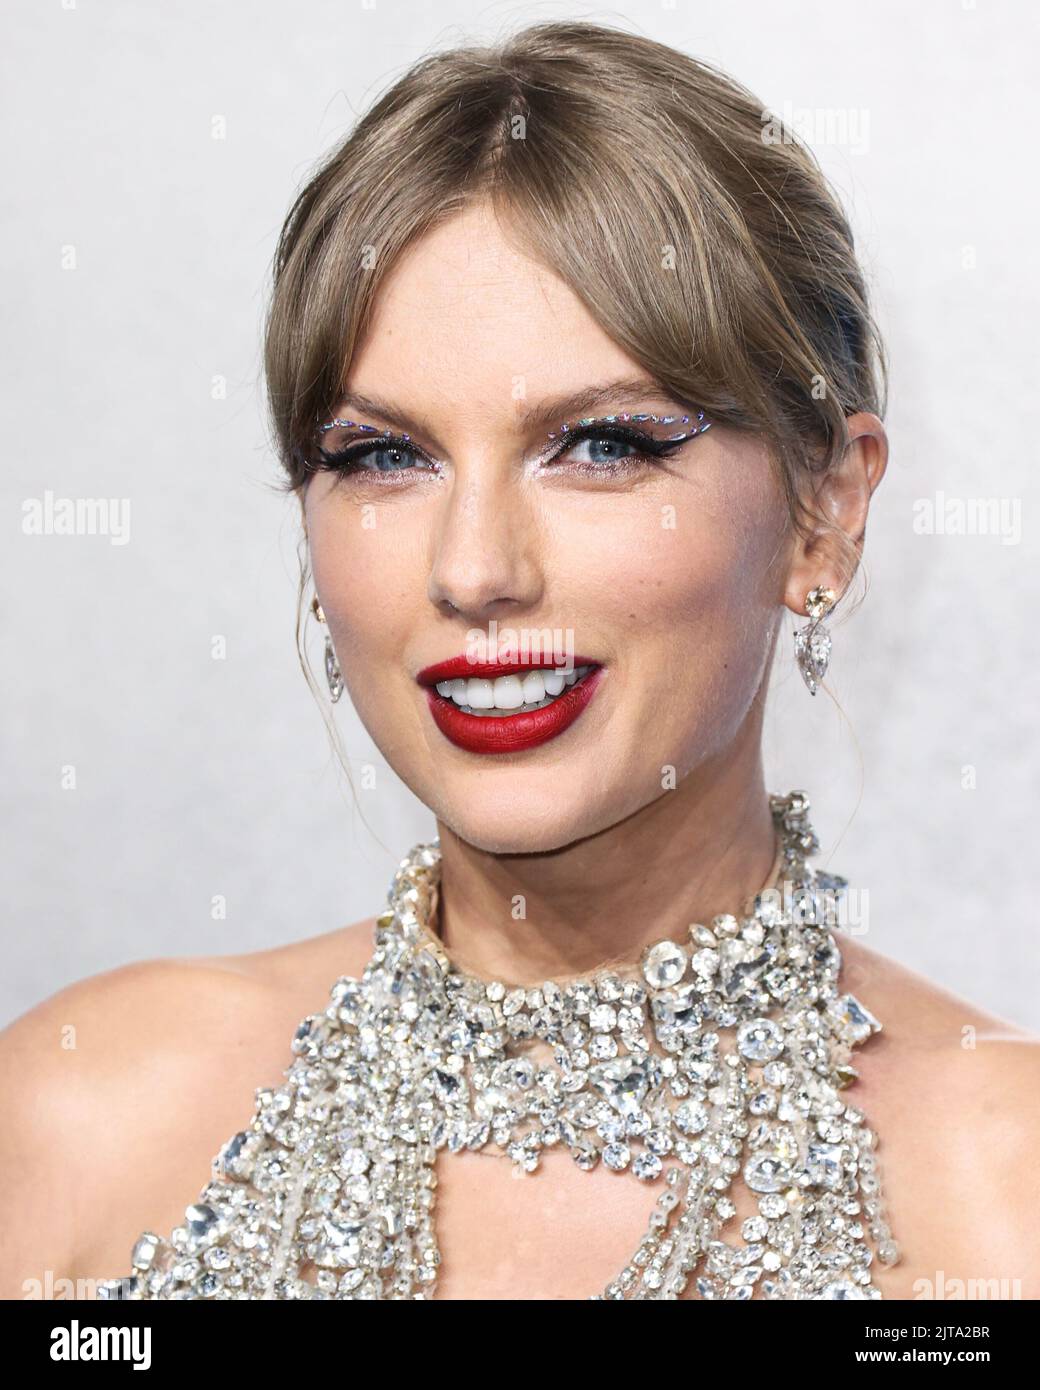 NEWARK, NEW JERSEY, USA - AUGUST 28: Taylor Swift wearing an Oscar de la Renta dress, Christian Louboutin shoes, and Lorraine Schwartz jewelry arrives at the 2022 MTV Video Music Awards held at the Prudential Center on August 28, 2022 in Newark, New Jersey, USA. (Photo by Xavier Collin/Image Press Agency) Stock Photo